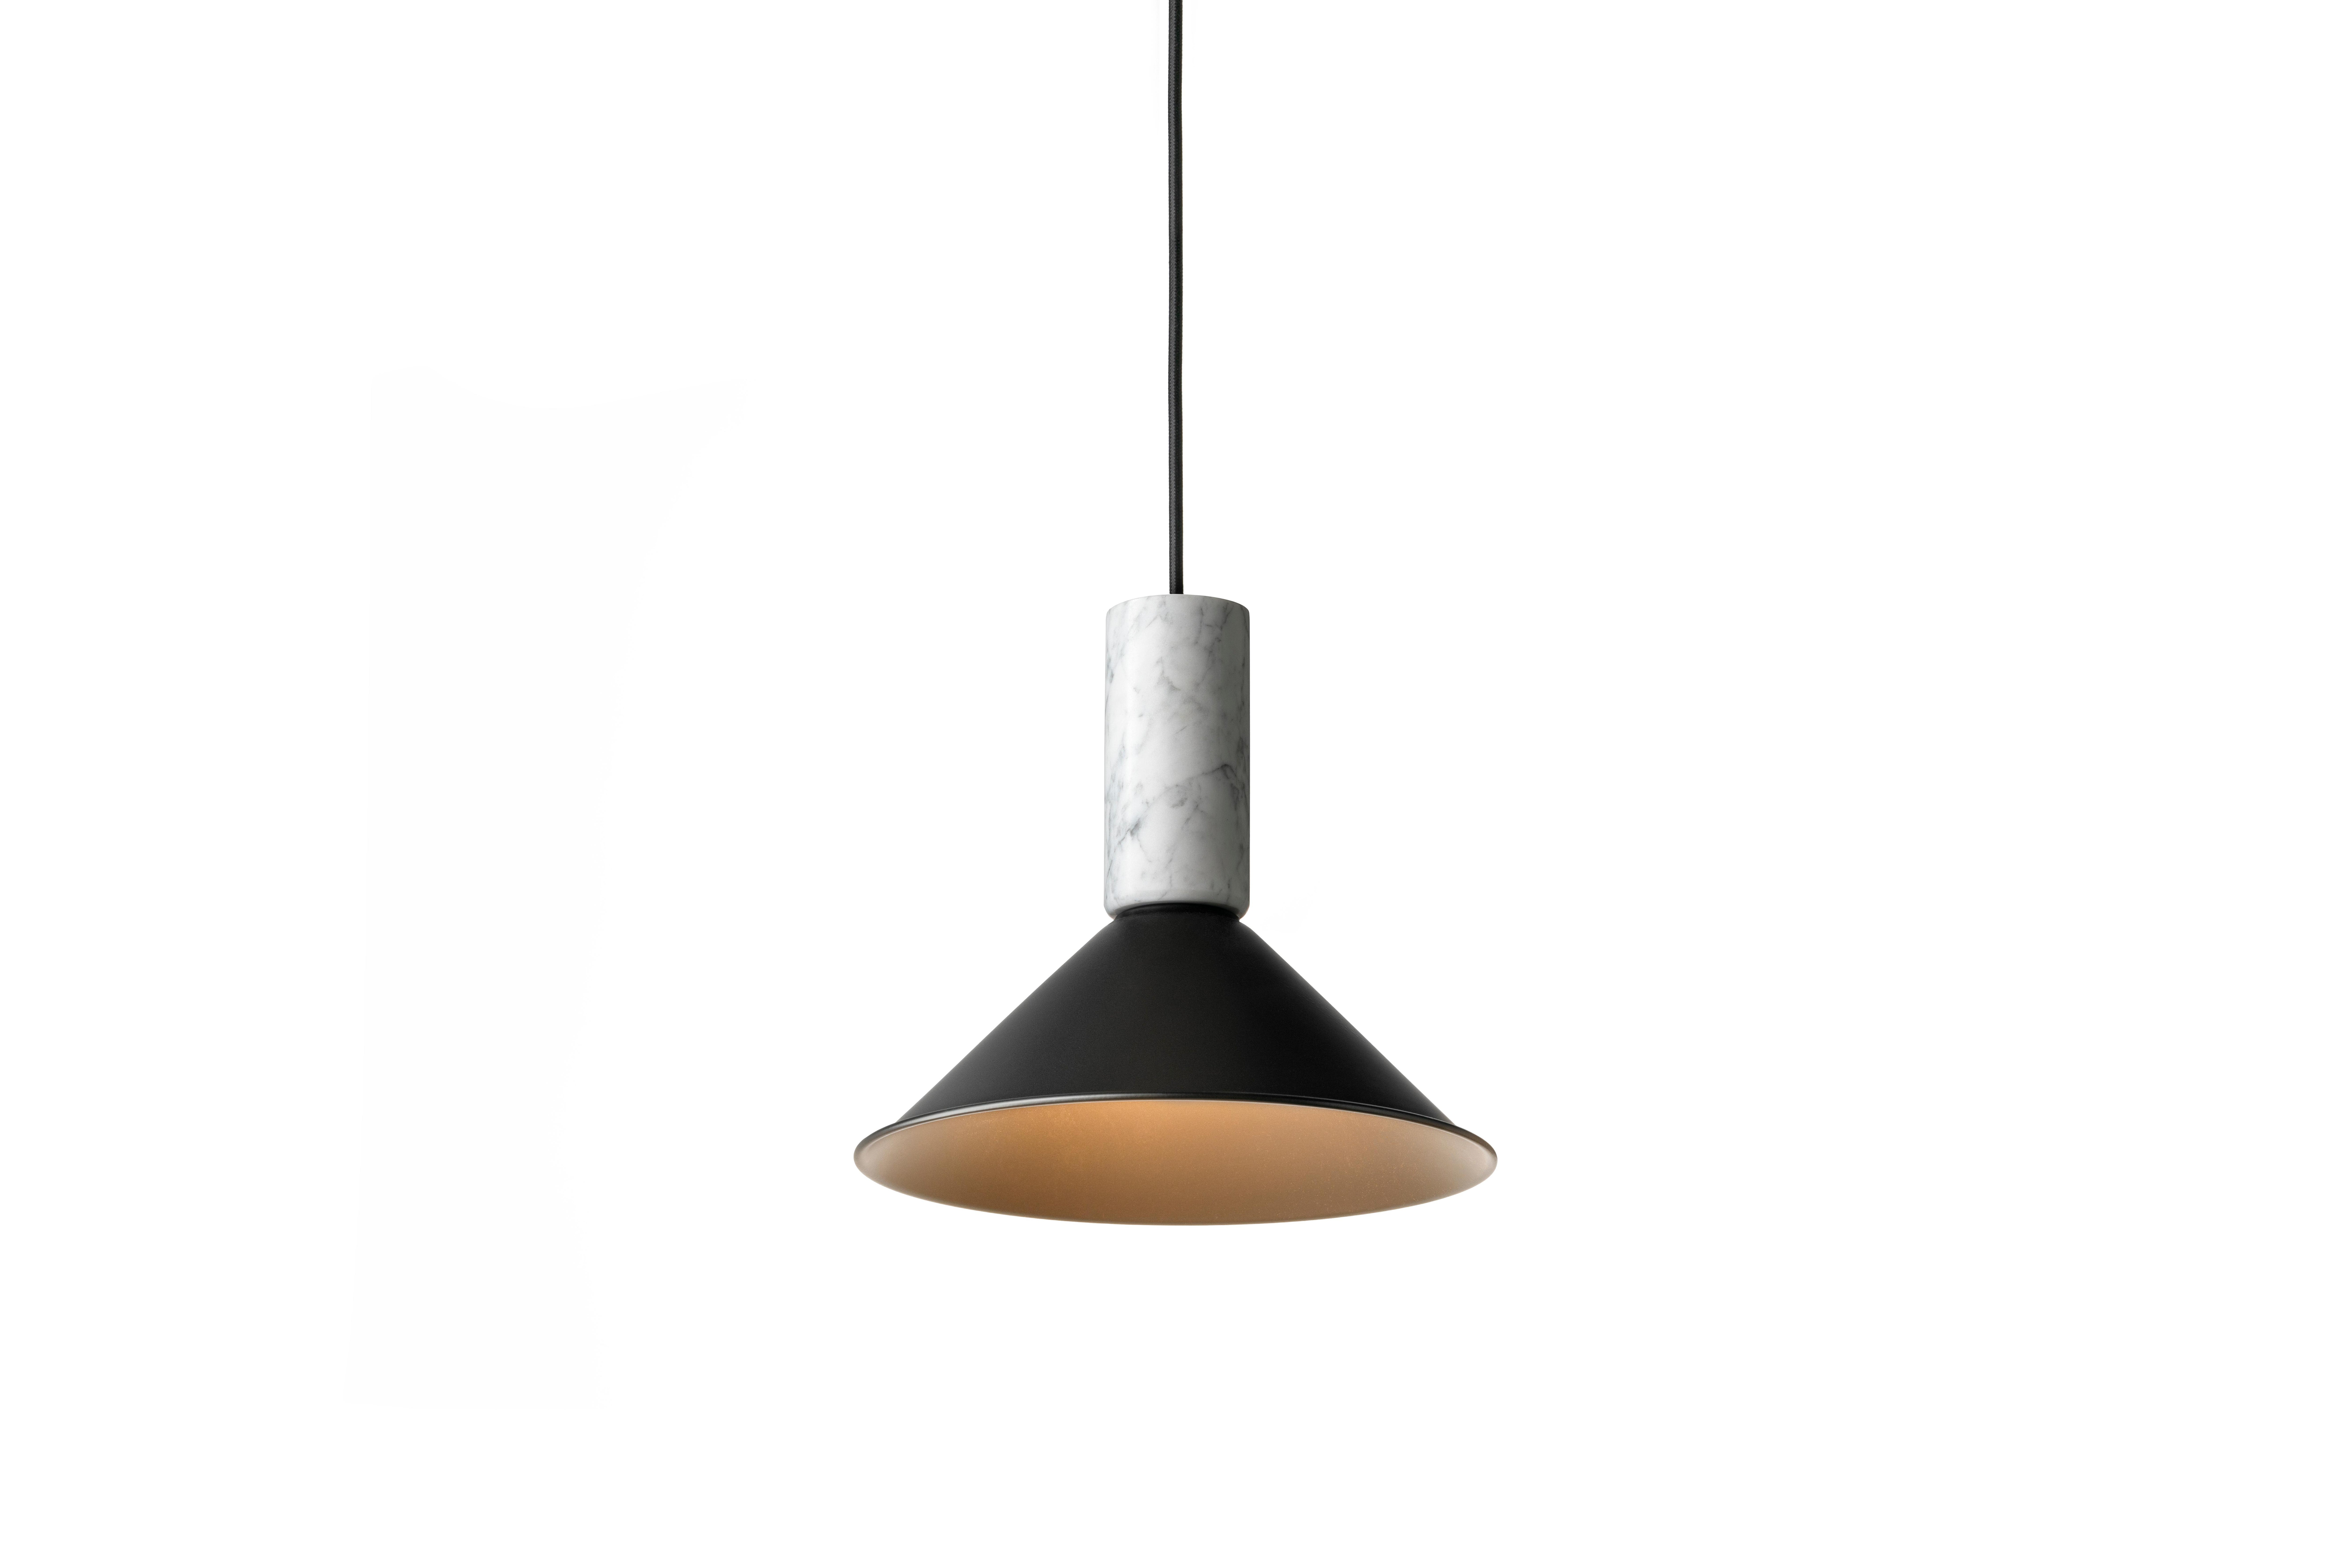 Pendant lamp 'R' by Buzao x Bentu design.
White marble and black aluminum

Measures: 24 cm high, 26 cm diameter
Wire: 2 meters black (adjustable) 
Lamp type: E27 LED 3W 100-240V 80Ra 200LM 2700K - Comptable with US electric system.
Ceiling rose: